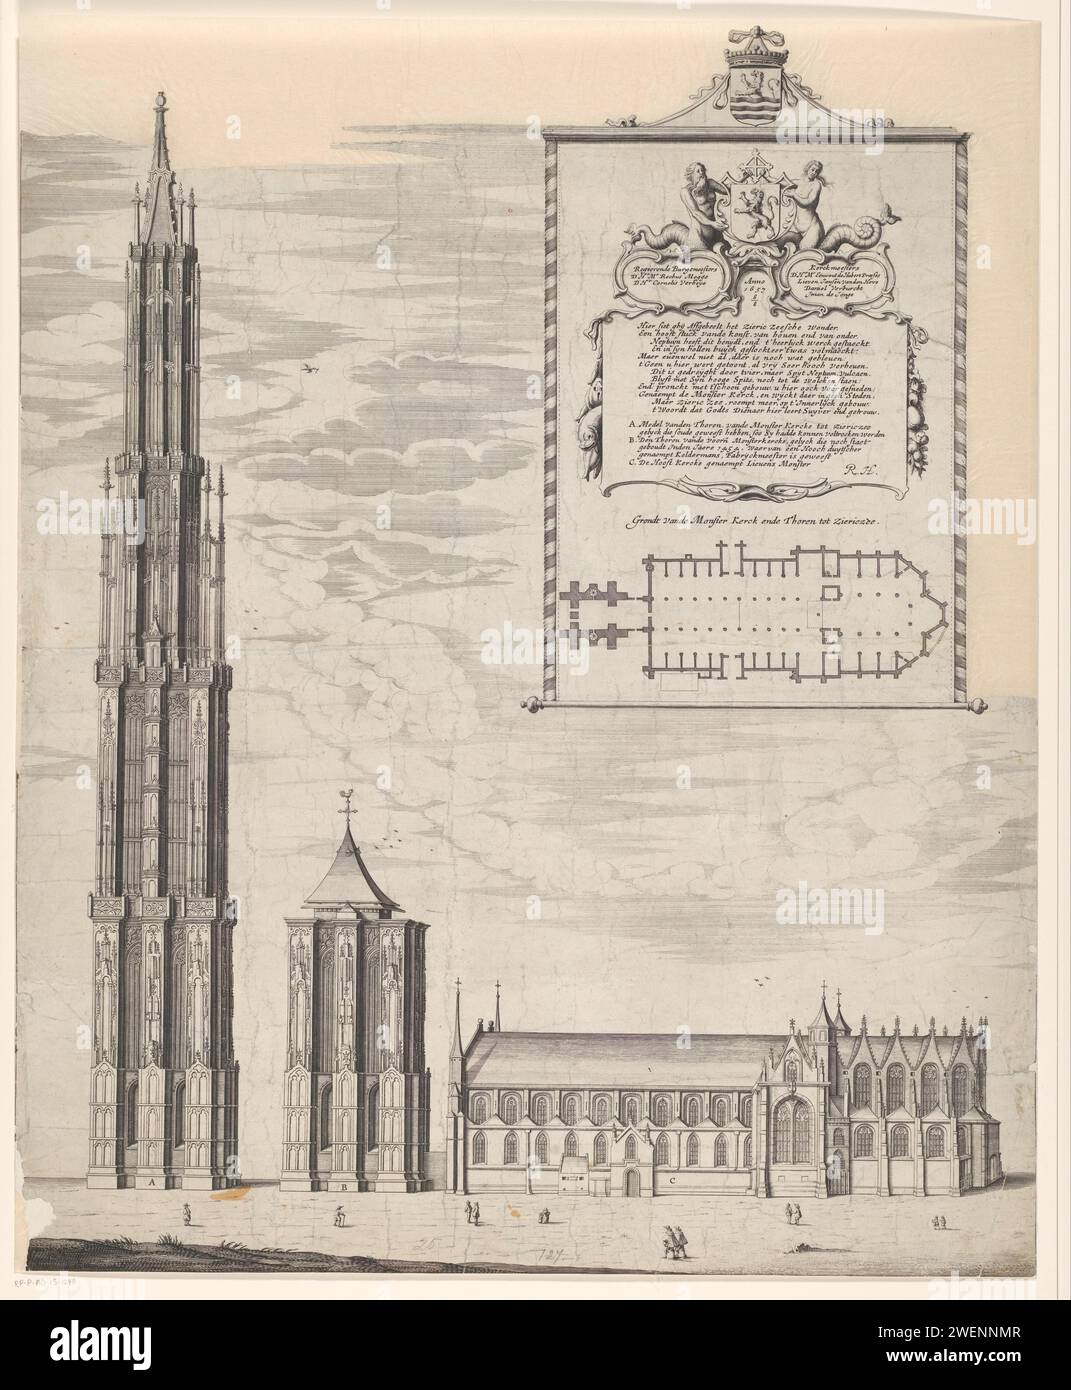 Image of the Sint-Lievensmonsterkerk in Zierikzee, Anonymous, 1657 print Image of the Sint-Lievensmonsterkerk in Zierikzee (C) with the tower to the left of the church building as it was actually built (B) and on the far left the tower as it should have looked if the construction would have been completed (A). At the top right the Wapen van Zeeland. Below that the Wapen van Zierikzee flanked by a Meerman and woman with the assignment underneath, a verse about the church and the legend A -C. Below that a map of the church and the tower ('Grondt van de Monster Kerck and Thoren to Ziericzee').  p Stock Photo